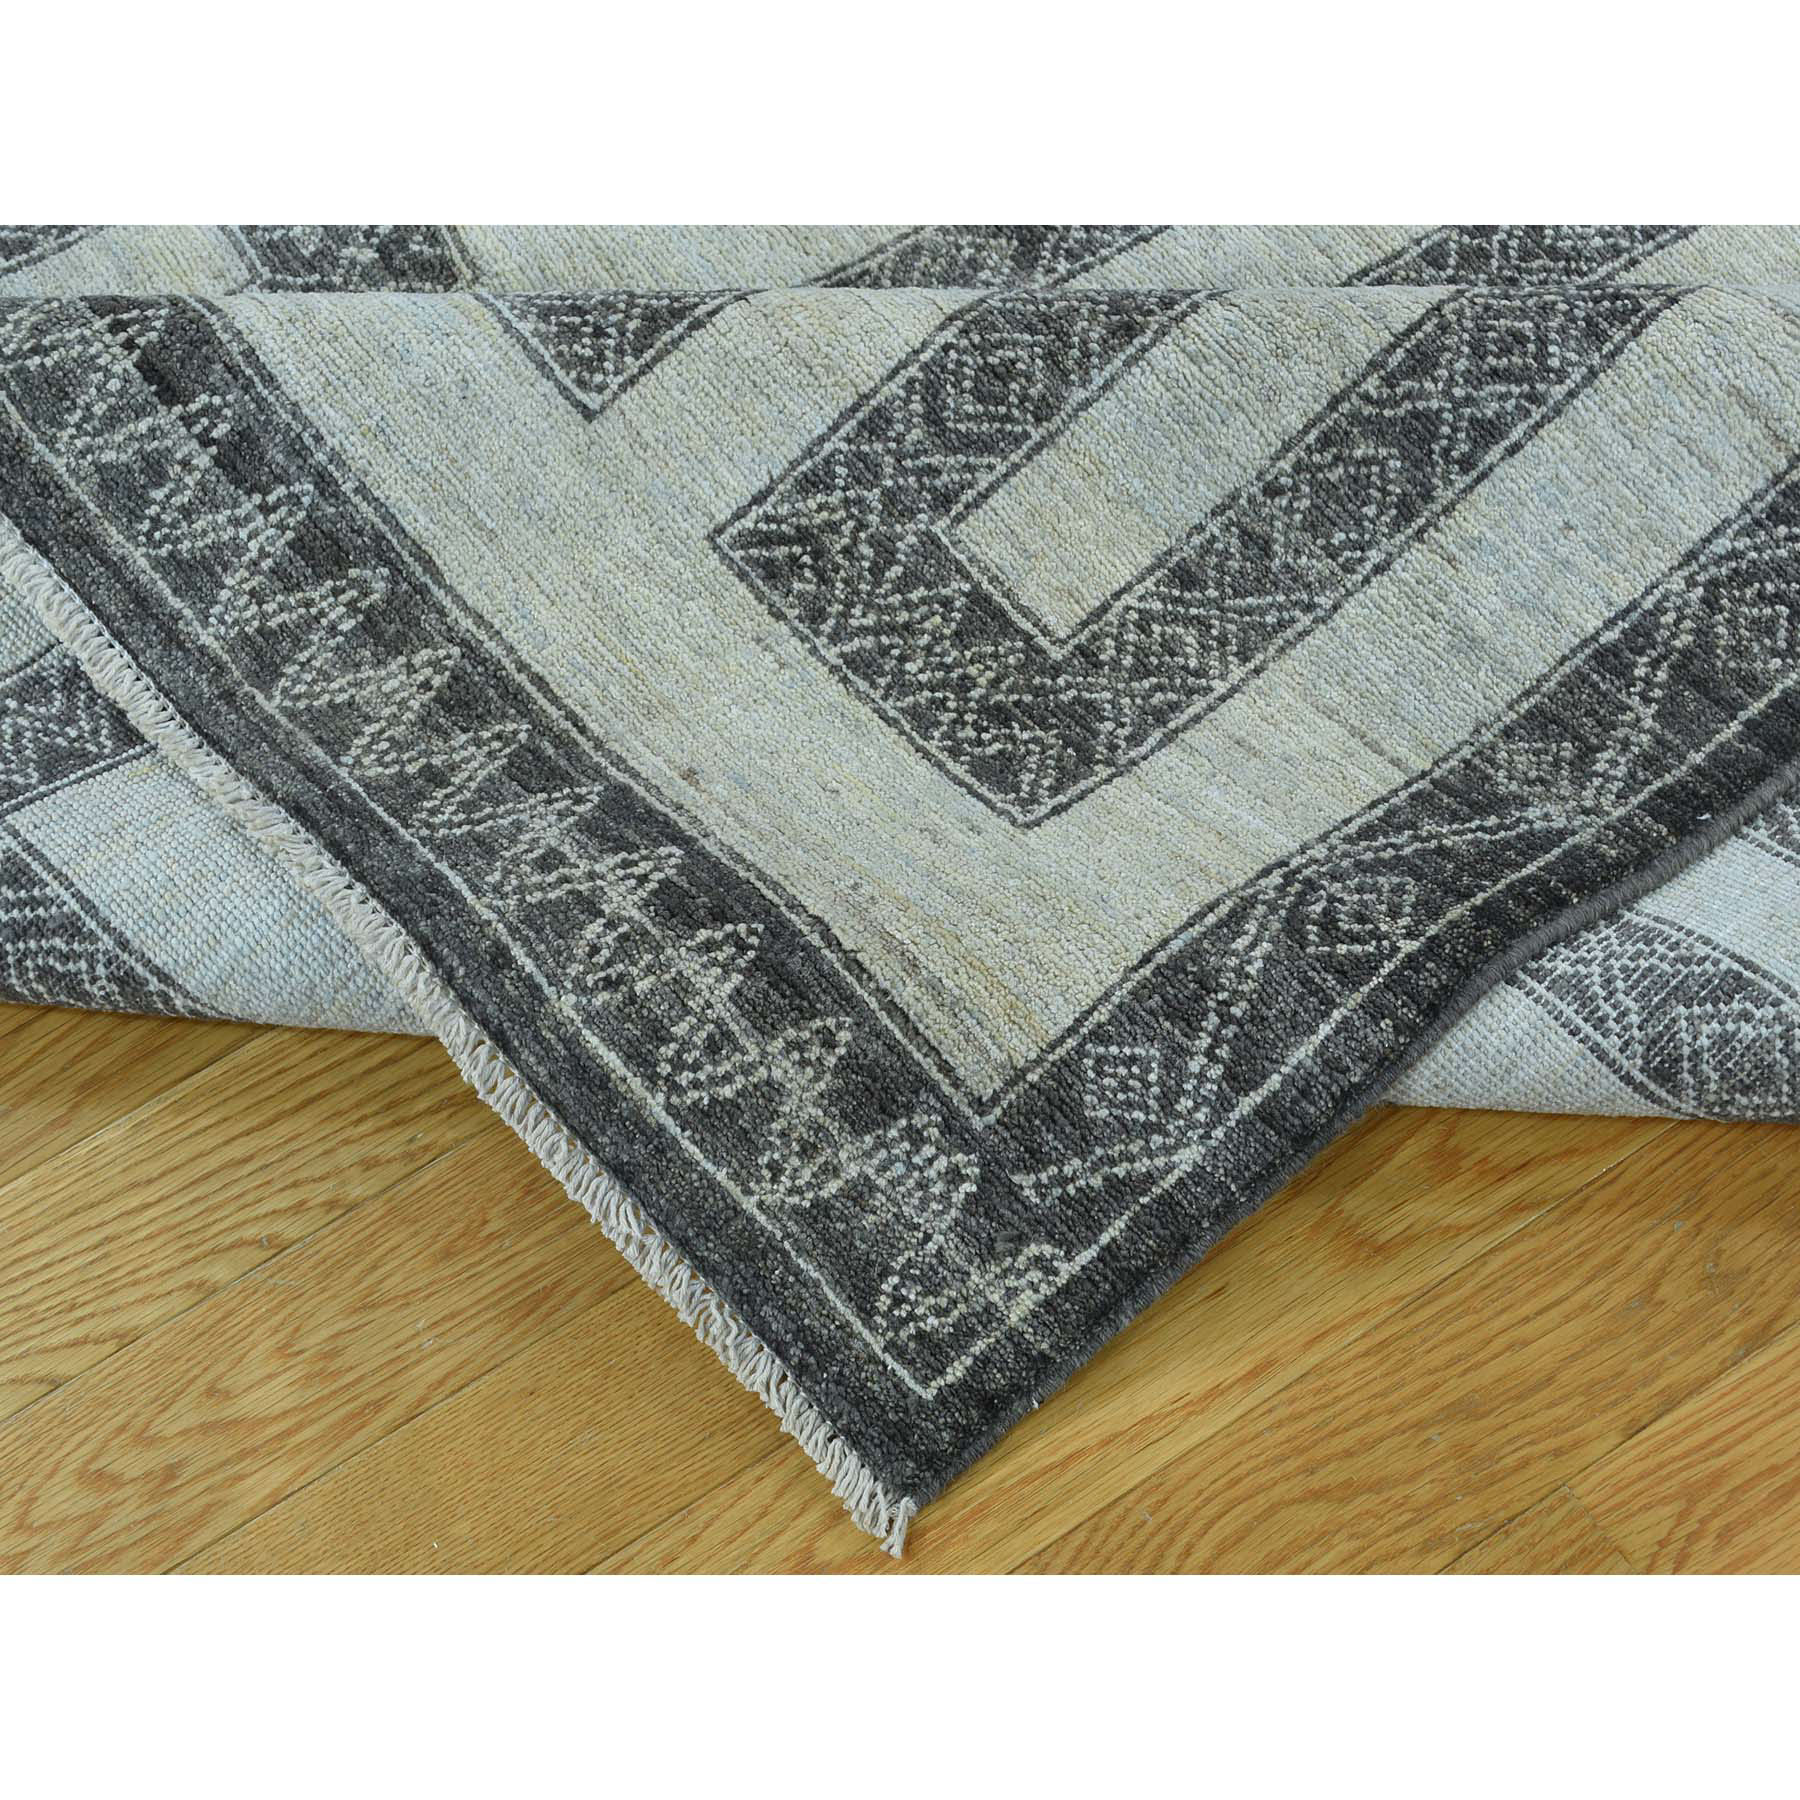 6-x9-1  Hand-Knotted Pure Wool Maze Design with Berber Influence Rug 